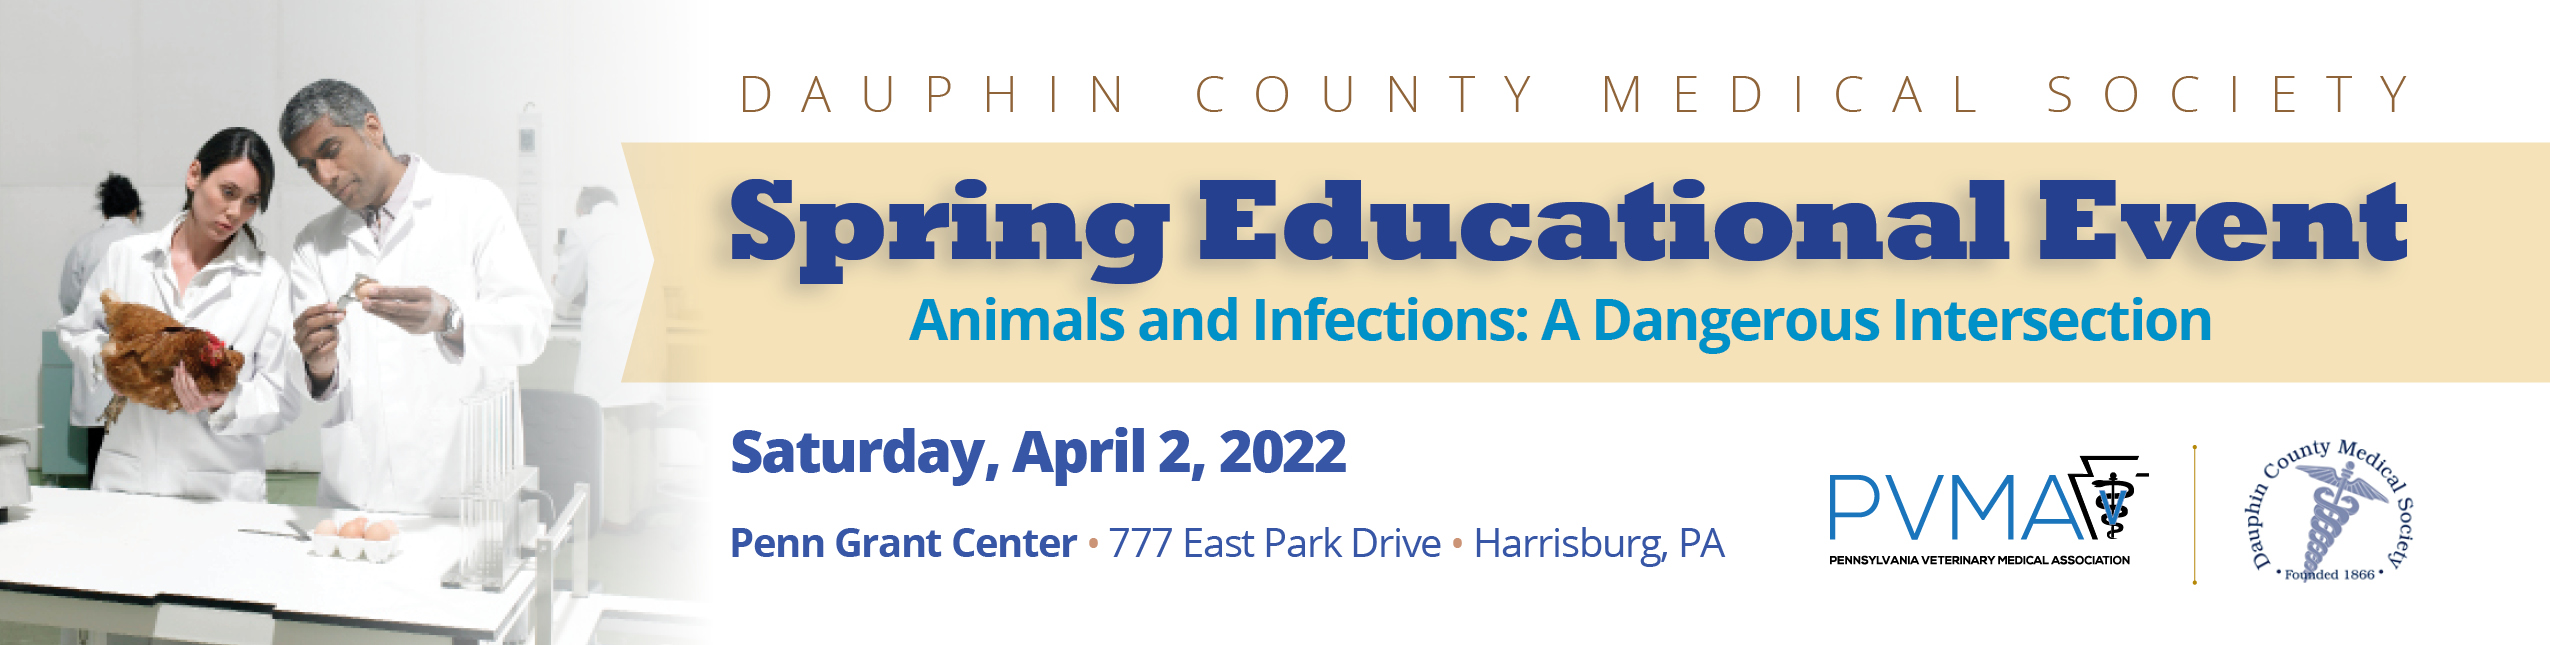 2022 DCMS Spring Education Meeting: Animals and Infections: A Dangerous Intersection